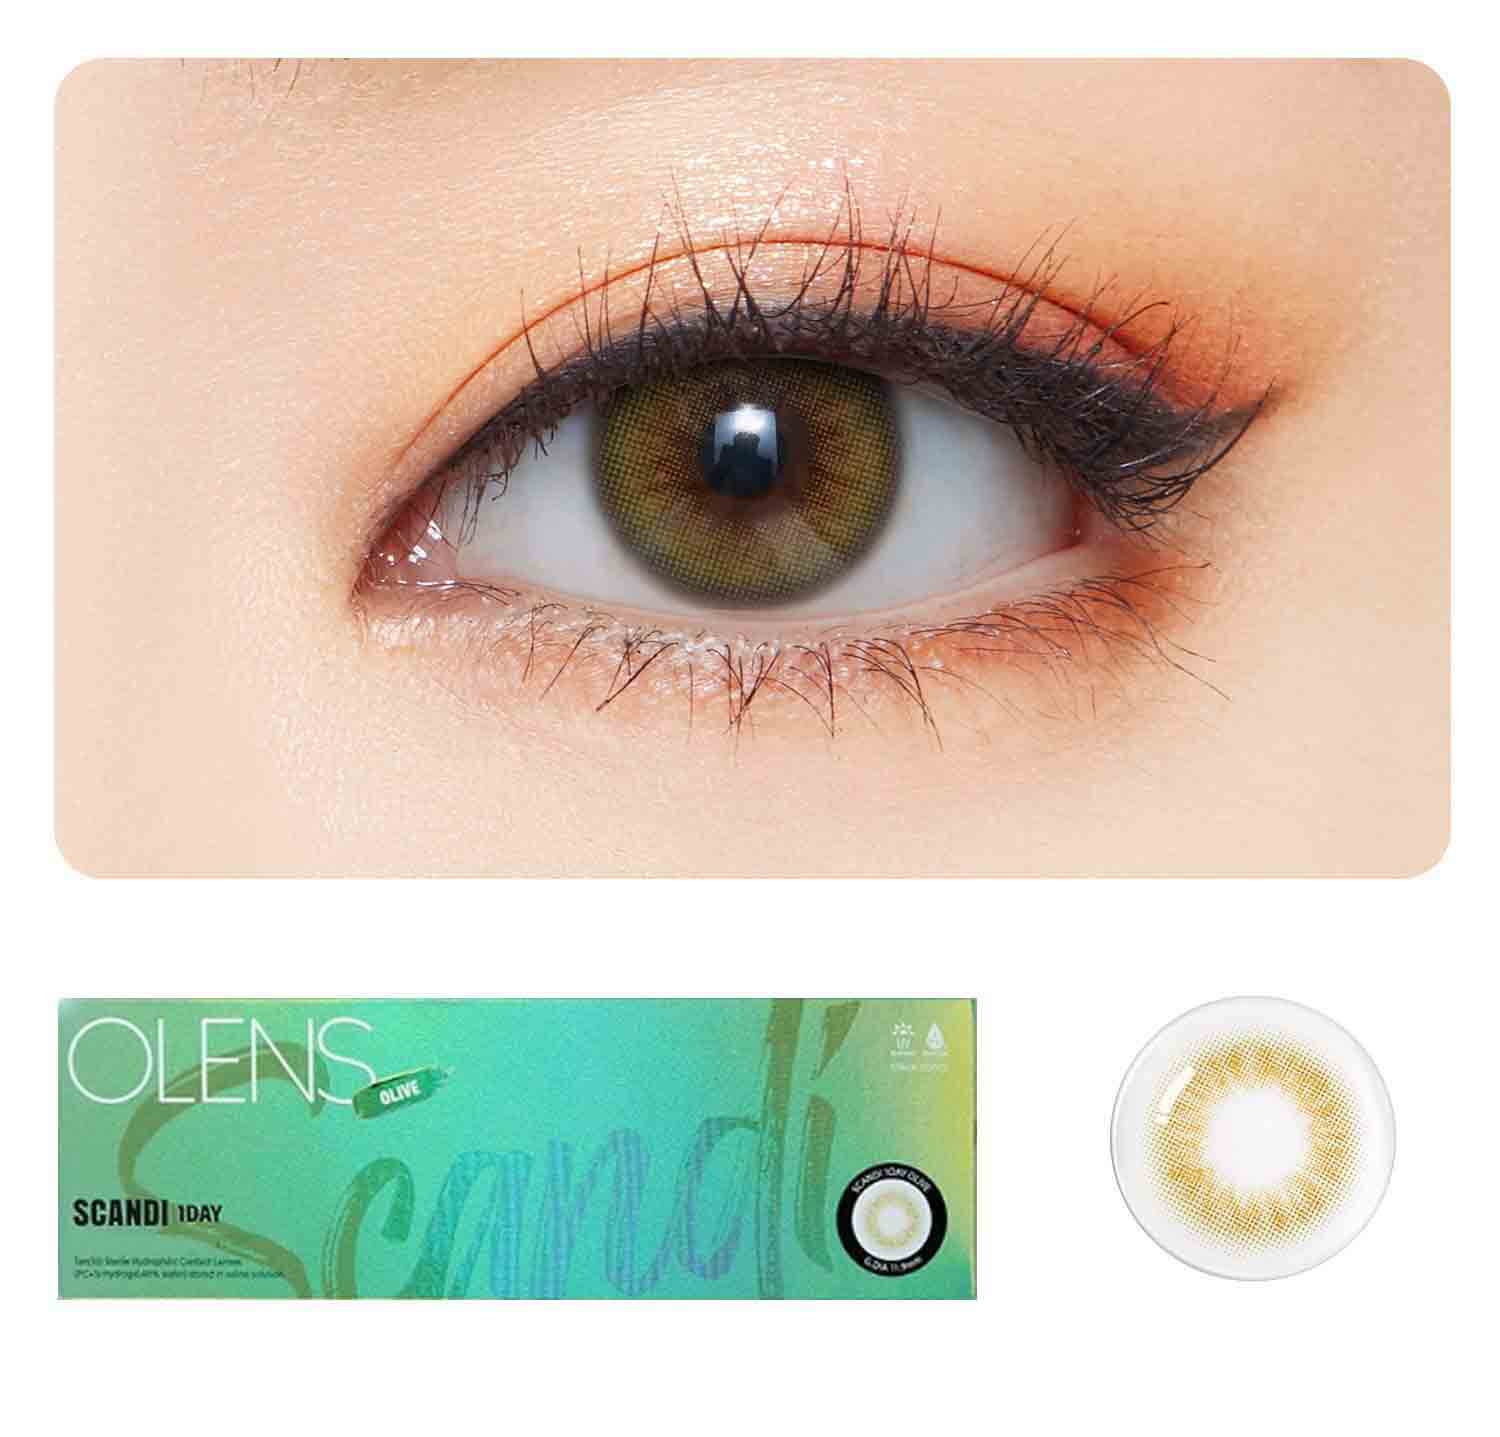 OLENS Premium Color Contact Lens Scandi Olive 1 day | 1 Day Disposable Trial Pack| o-lens.co.in.